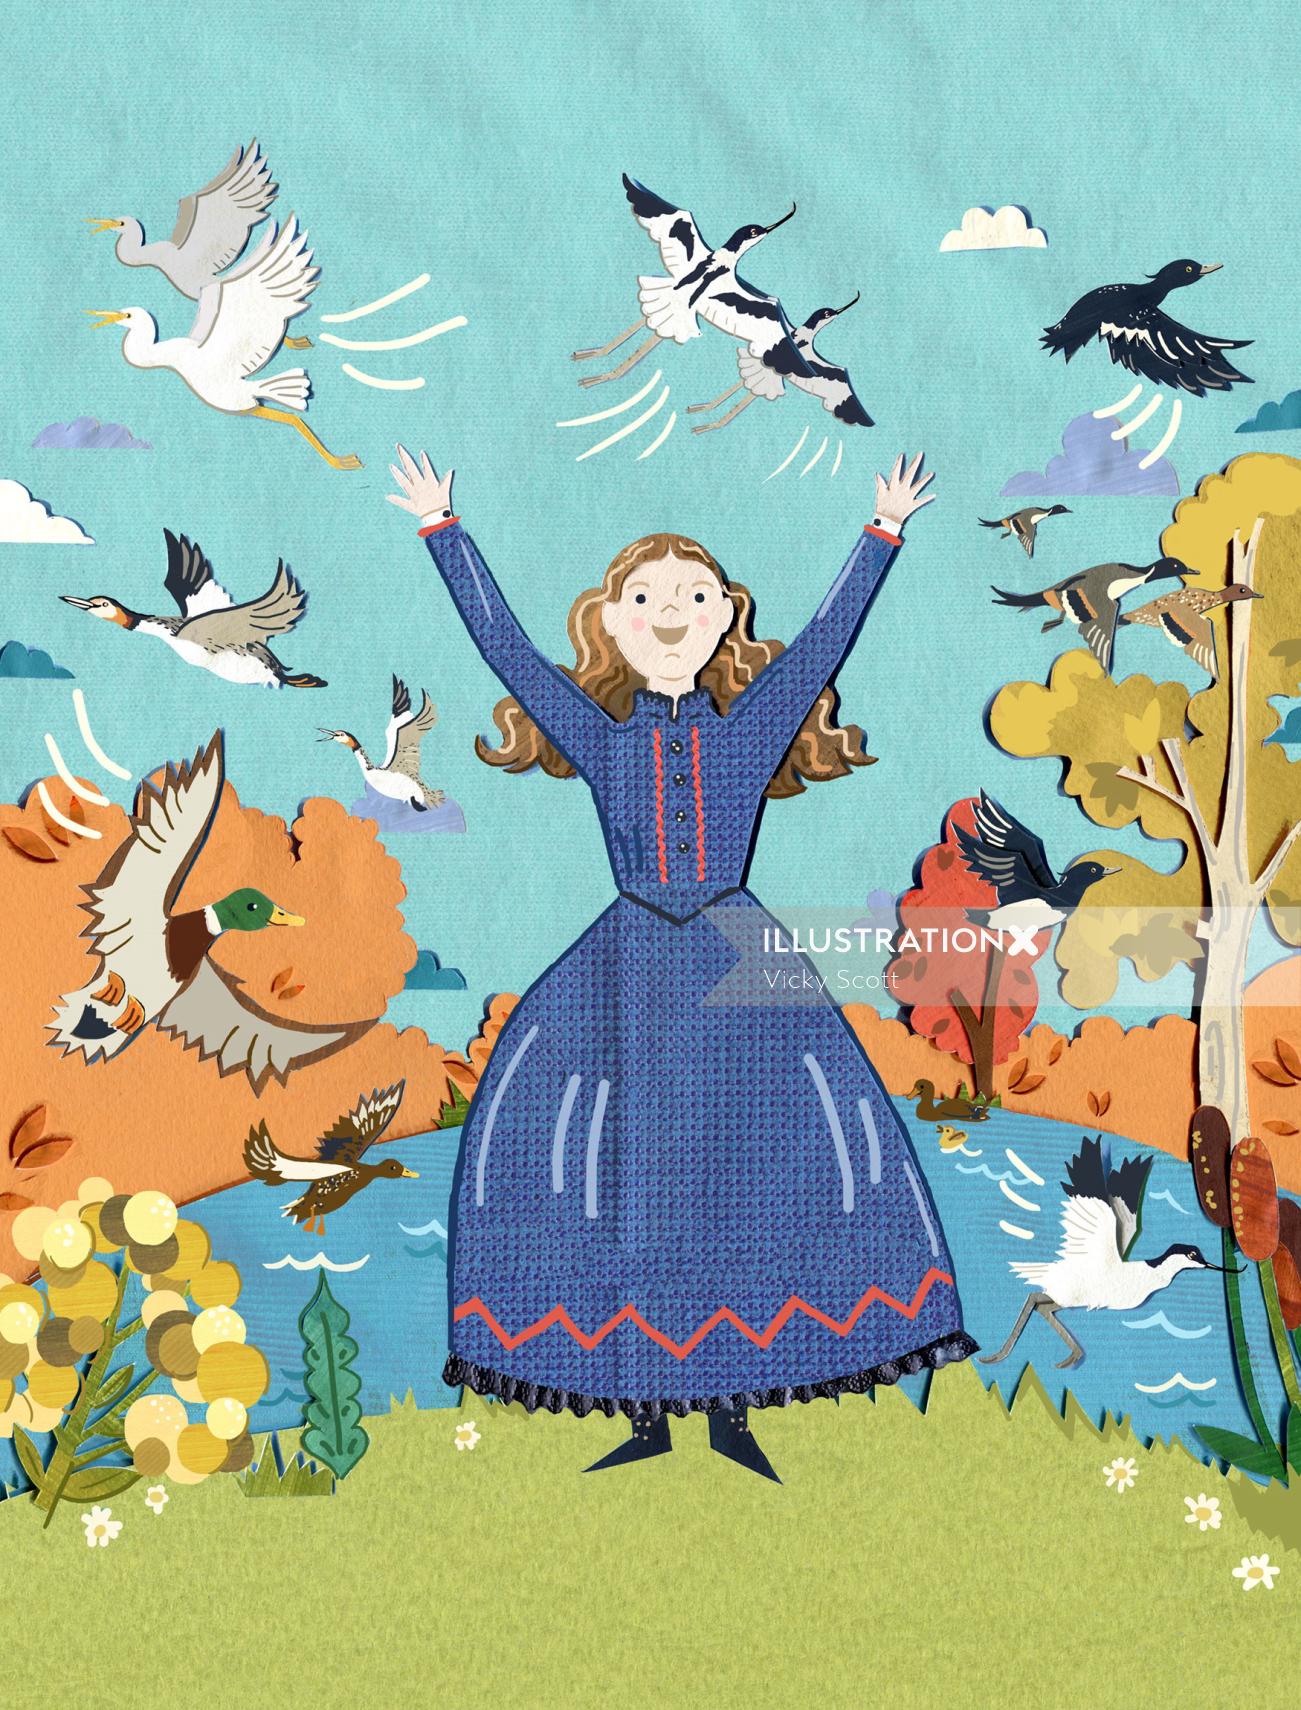 Illustration for the RSPB showing the happy scene